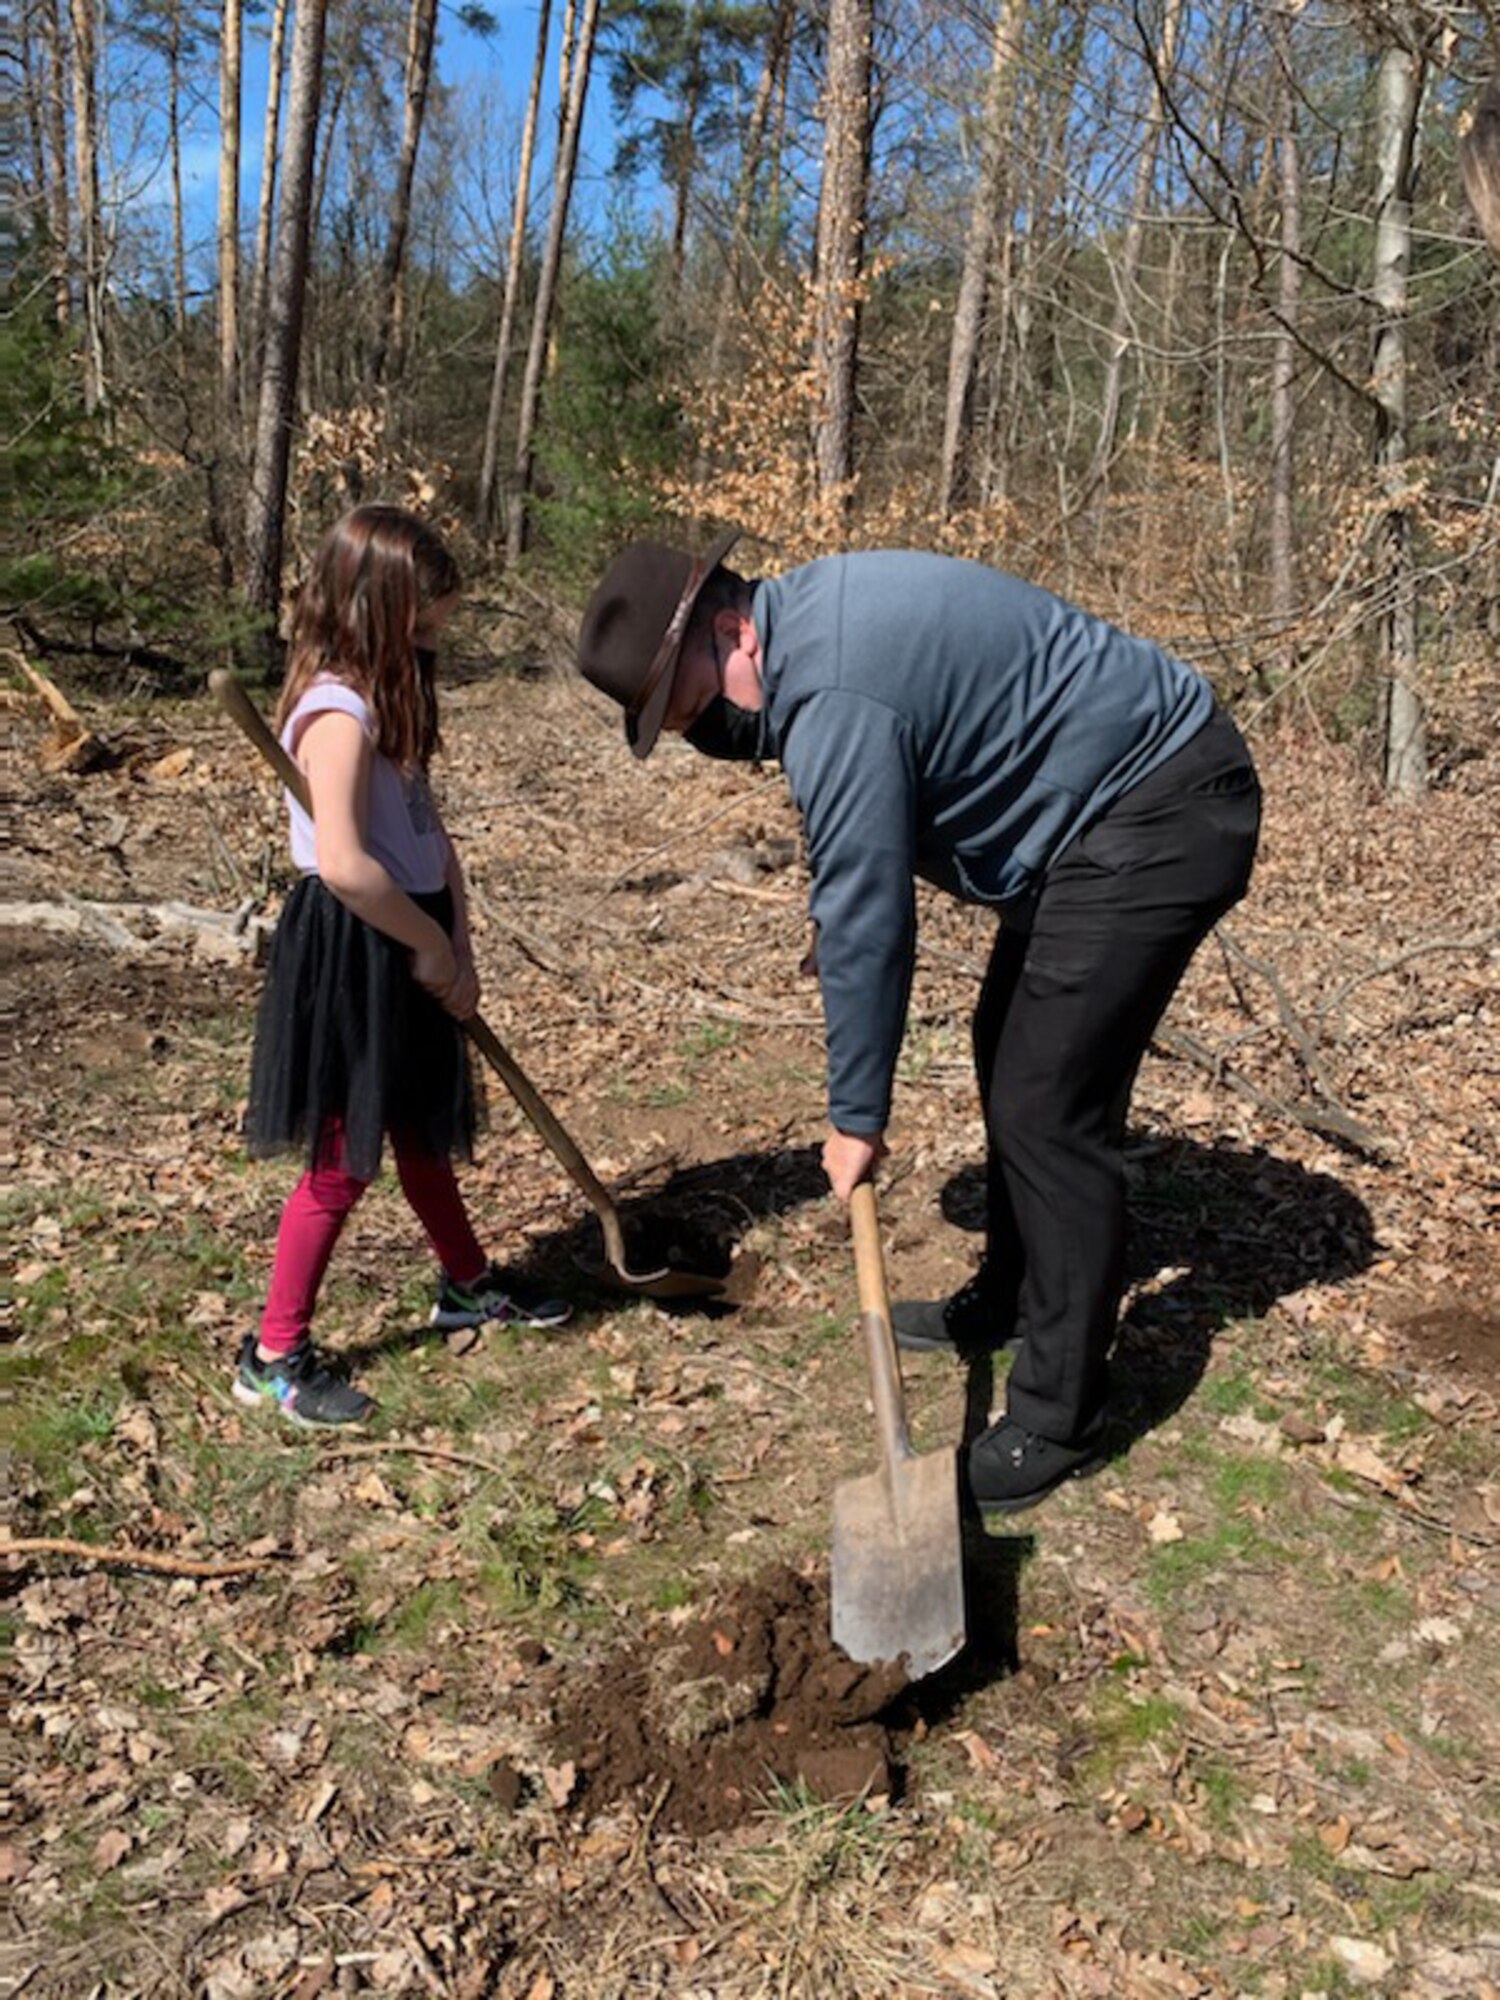 Erik Lagerquist, 86th Civil Engineer engineering flight chief, and his daughter, Courtney, plant an oak tree during Earth Day at Ramstein Air Base.